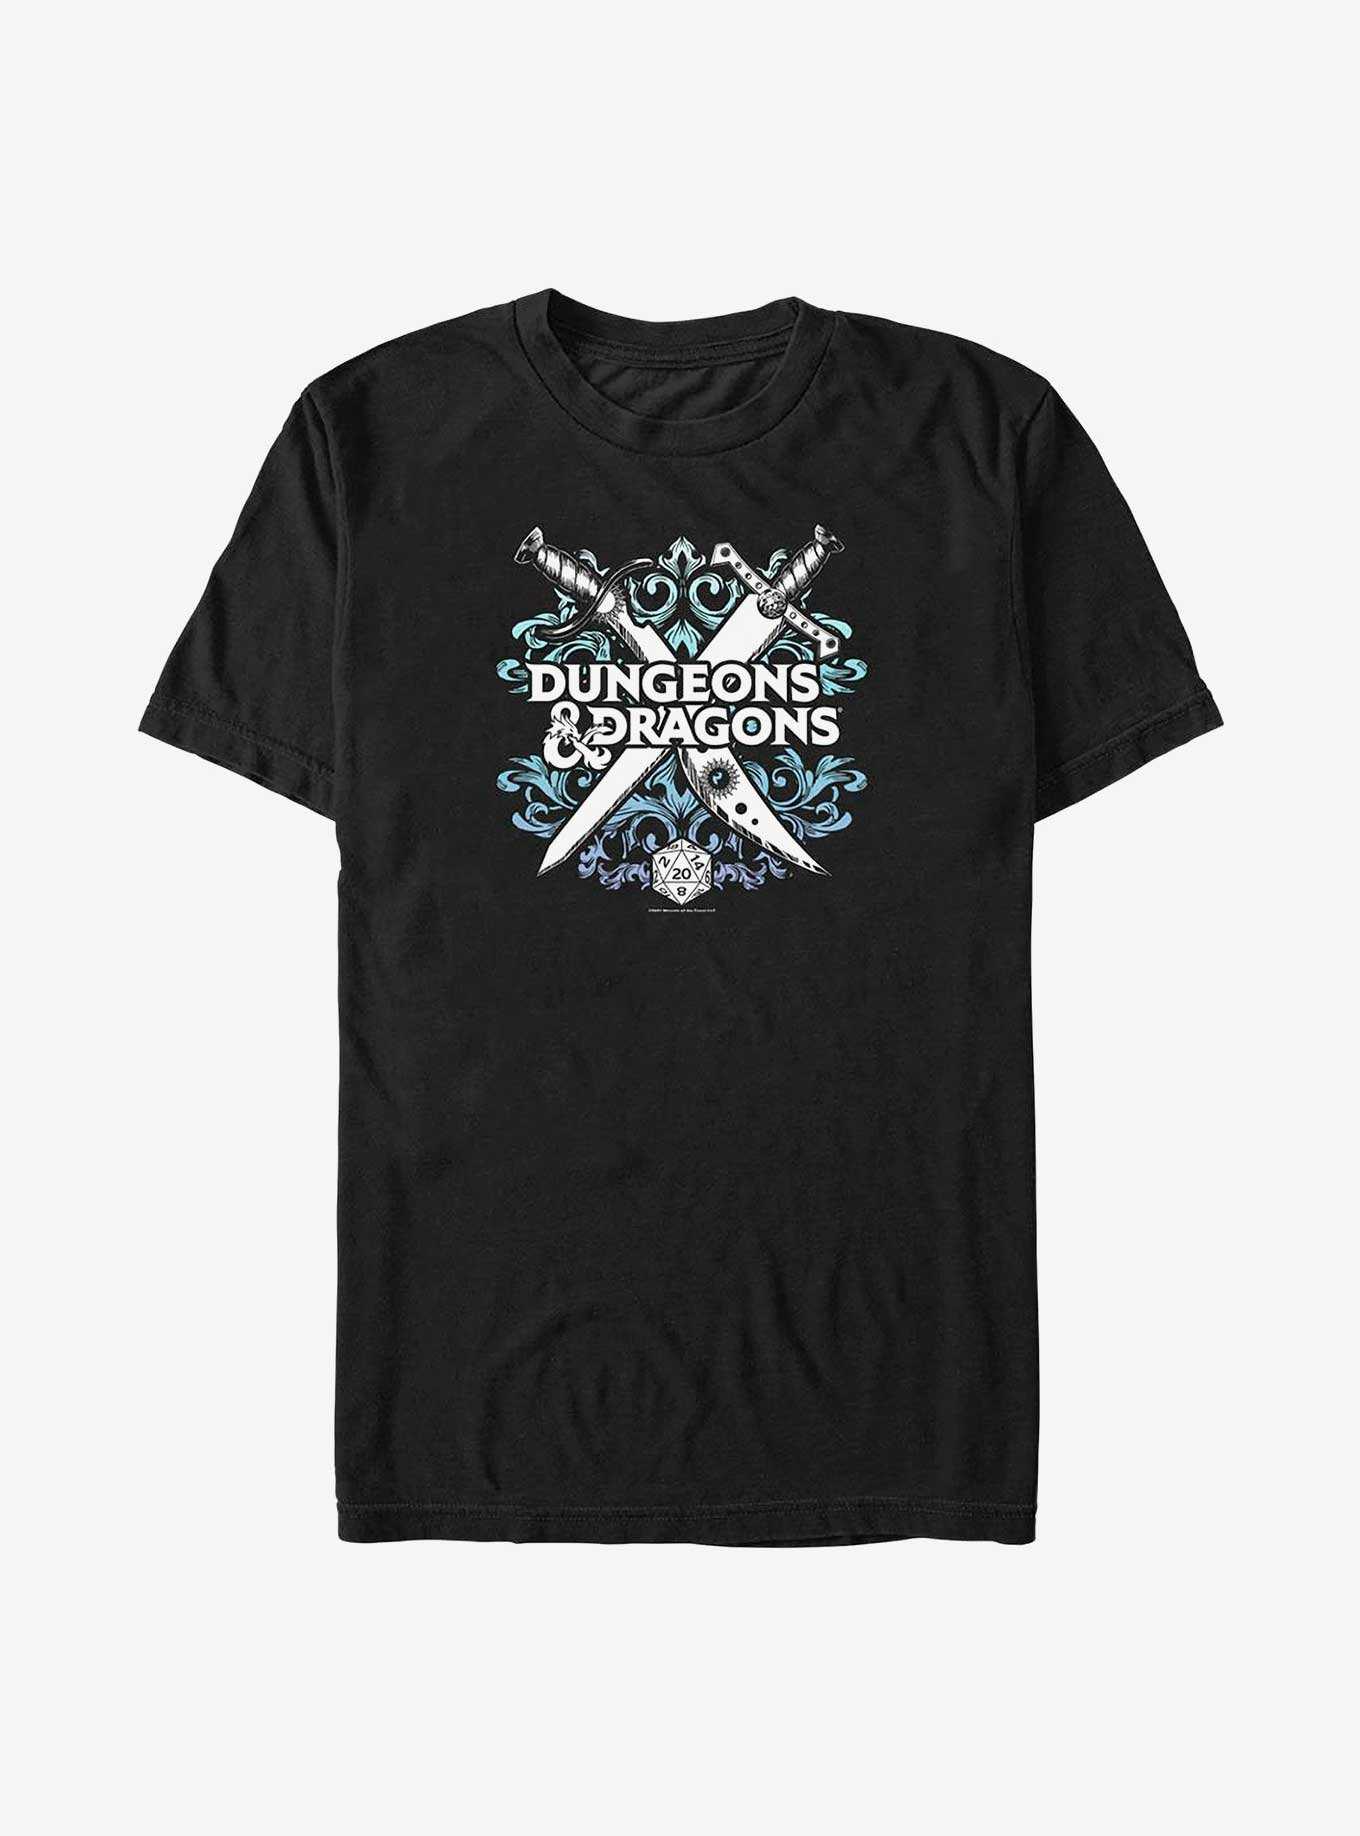 Dungeons & Dragons Decorative Crossed Weapons Big & Tall T-Shirt, , hi-res